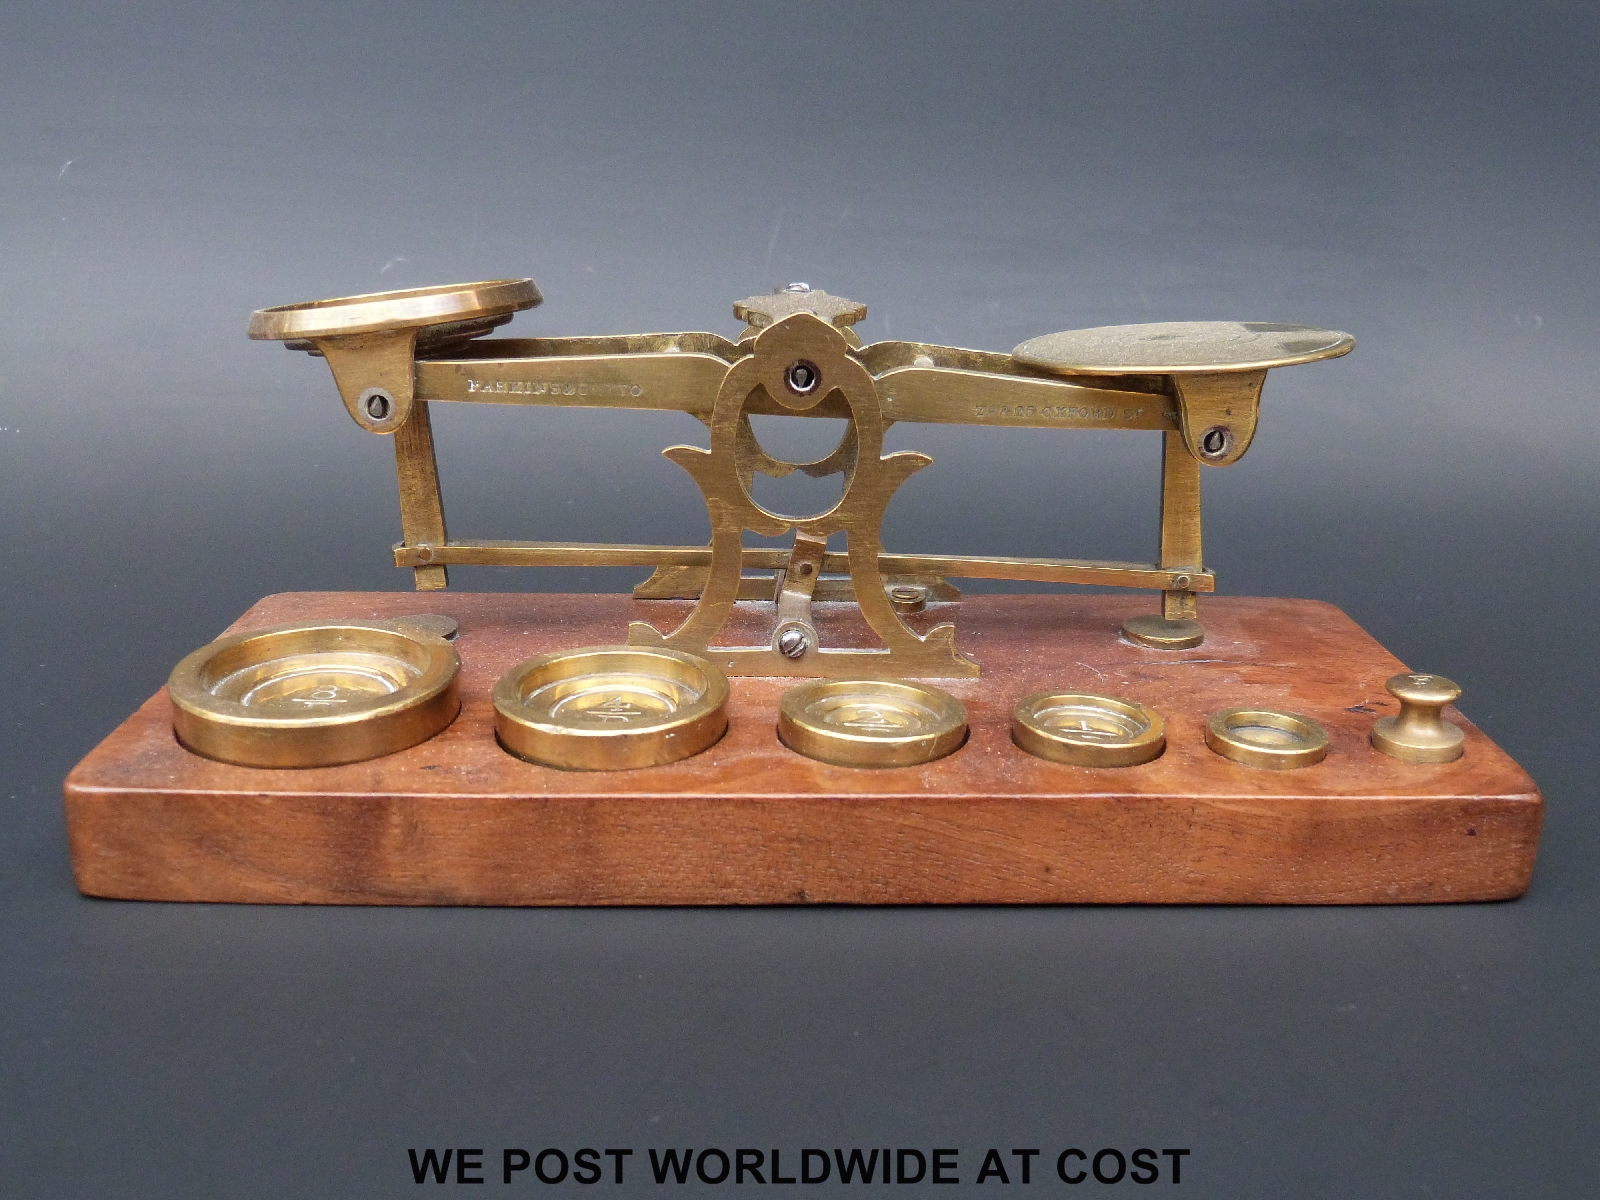 A set of Parkins & Gotto postage scales on wooden base with weights